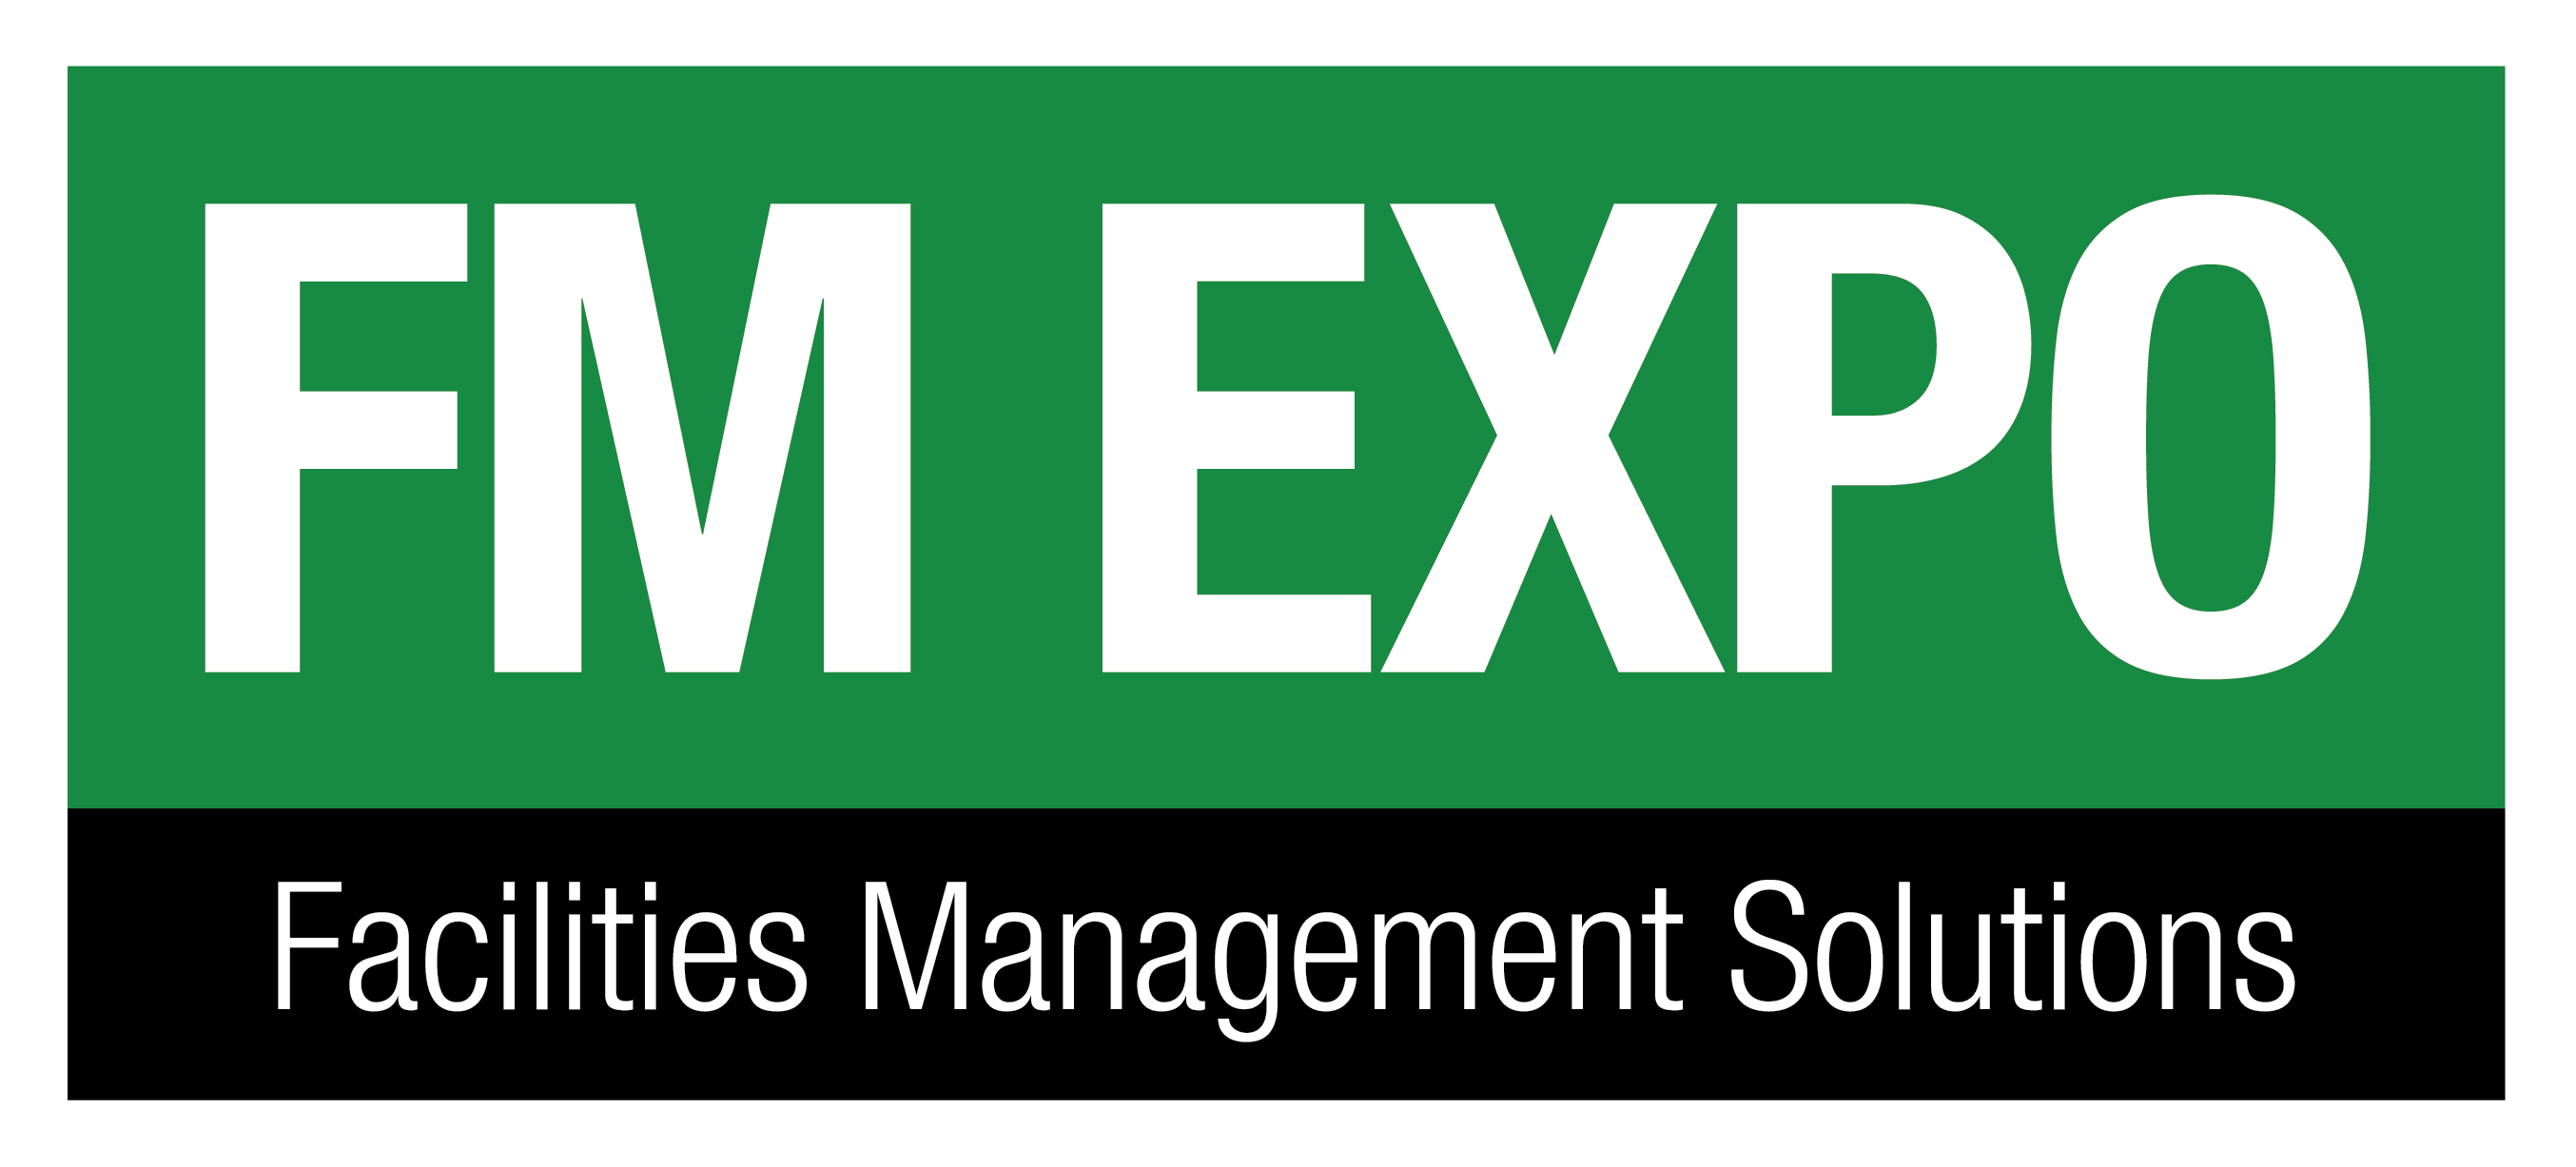 FMEXPO_LOGO_2017-01.png